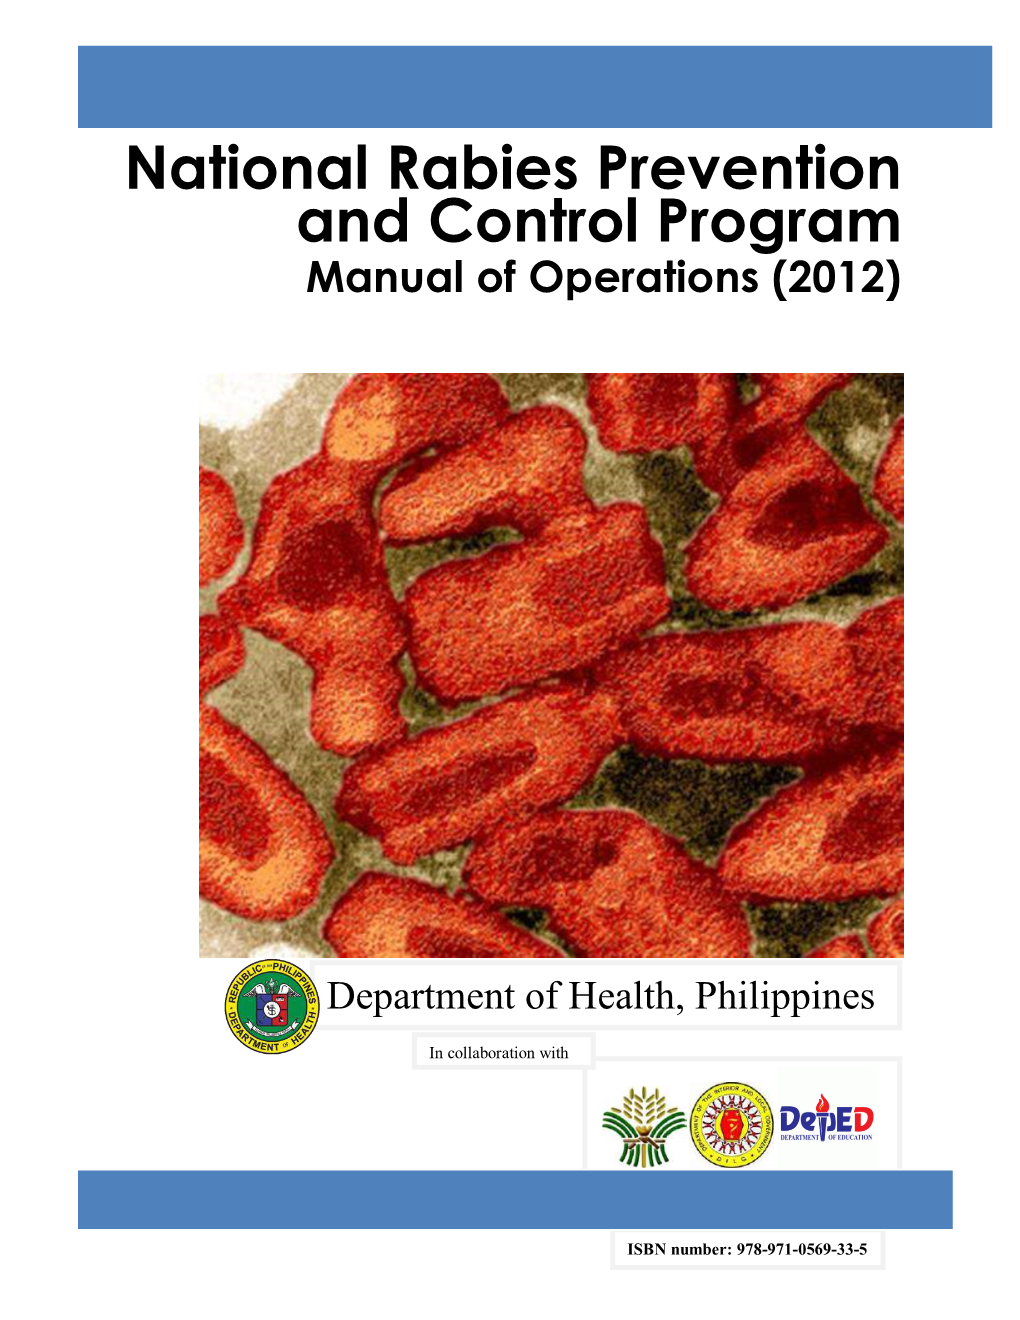 National Rabies Prevention and Control Program Manual of Operations (2012)